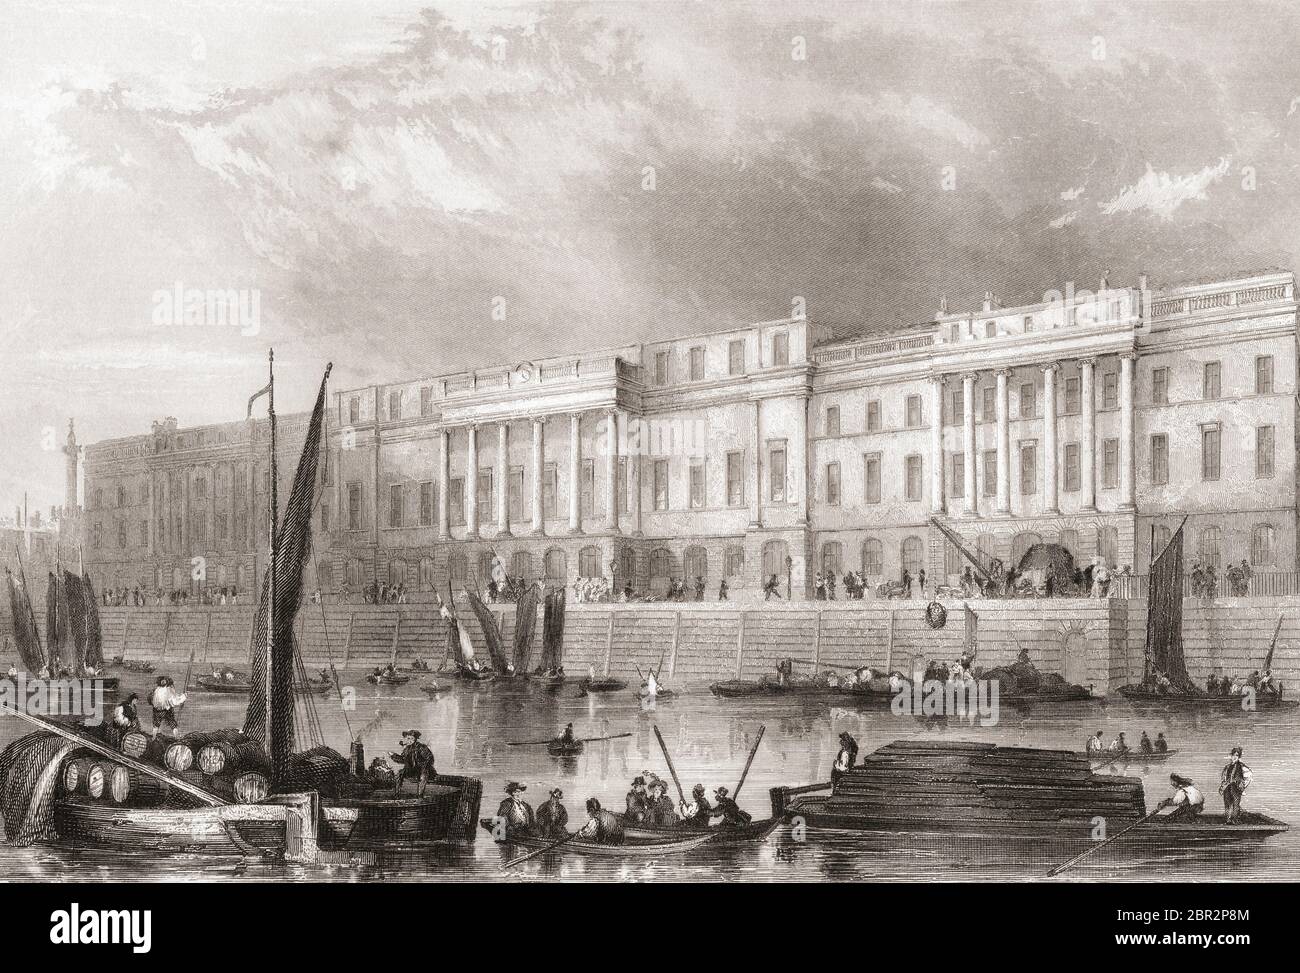 The Custom House, London, England, 19th century.  From The History of London: Illustrated by Views in London and Westminster, published c.1838. Stock Photo